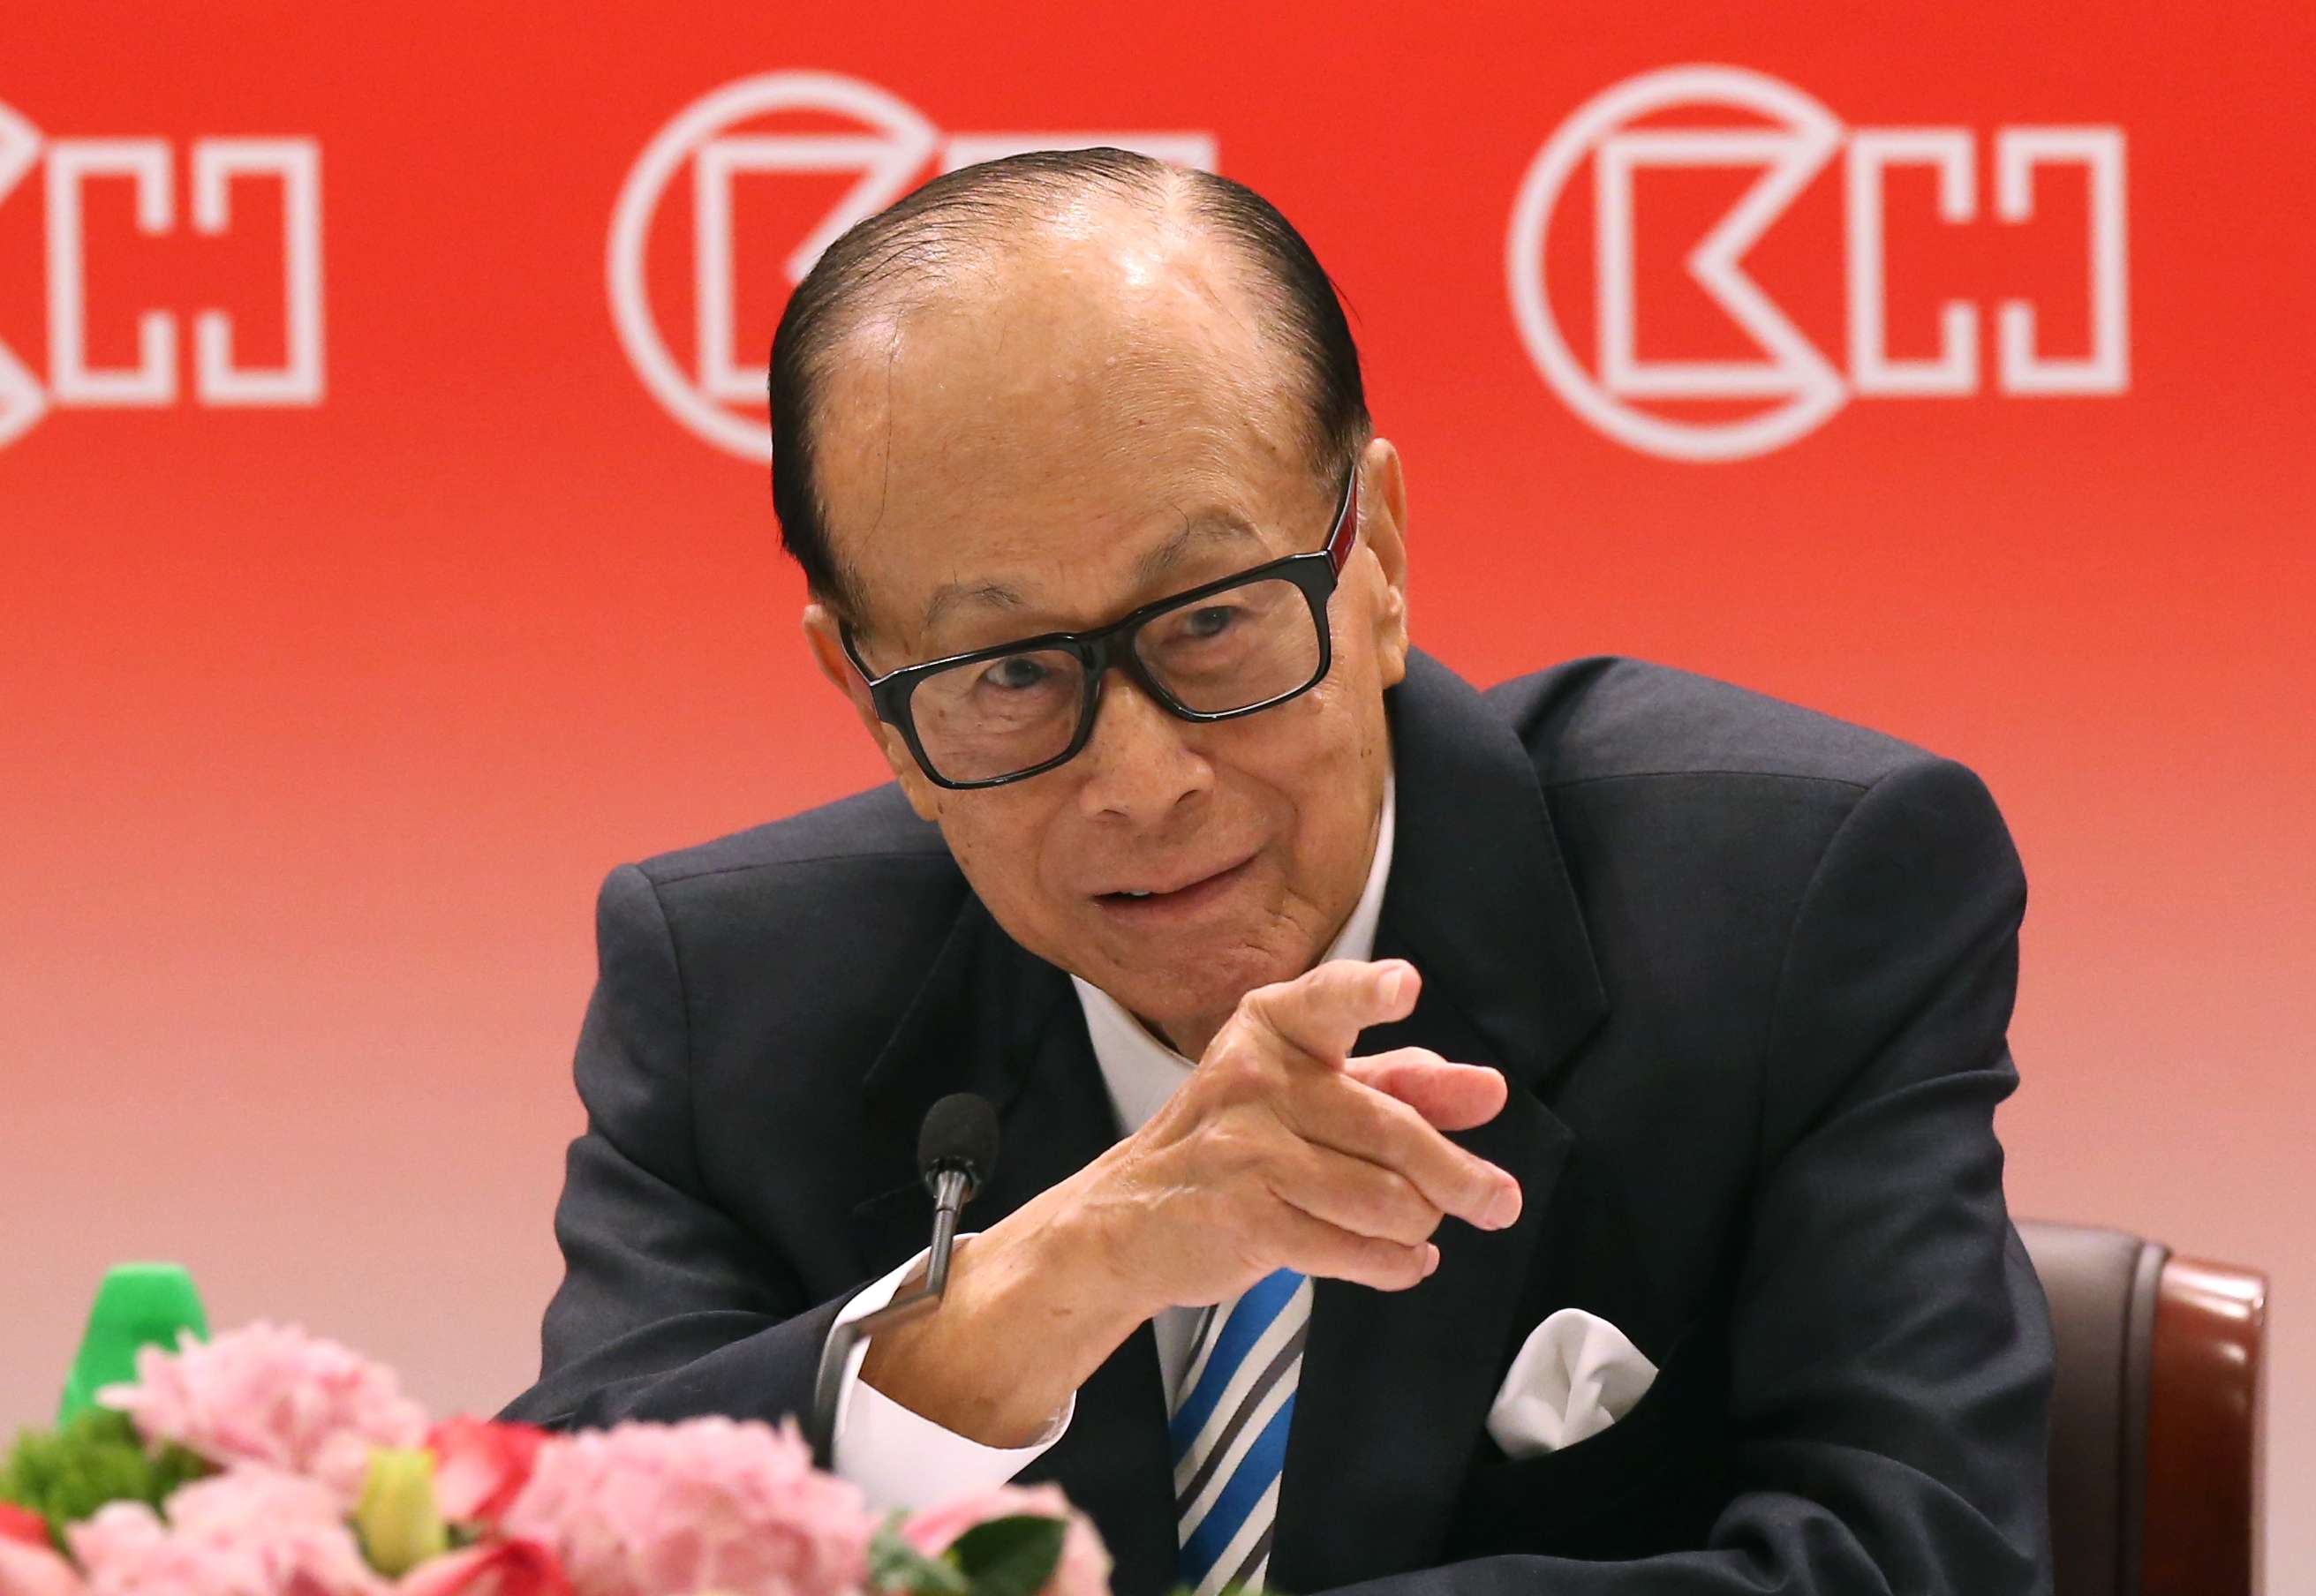 Li Ka-shing, founder and chairman of CK Property Holdings and CK Hutchison Holdings, announces the first set of full-year results for both companies after a reorganisation of his corporate holdings. Photo: K. Y. Cheng